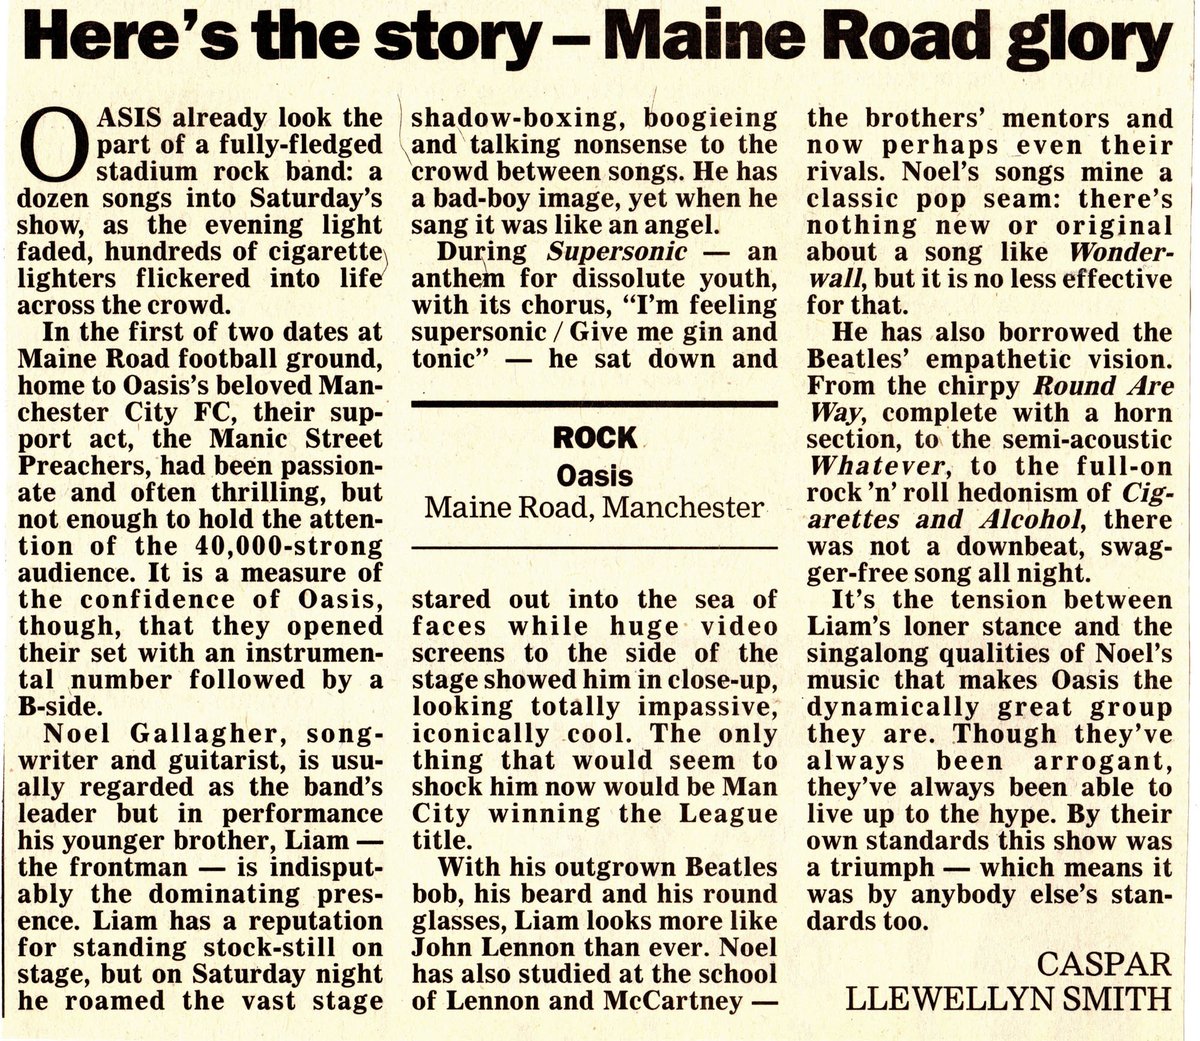 Various reviews of Oasis' Maine Road concerts in Manchester from 1996.  #MaineRoad25